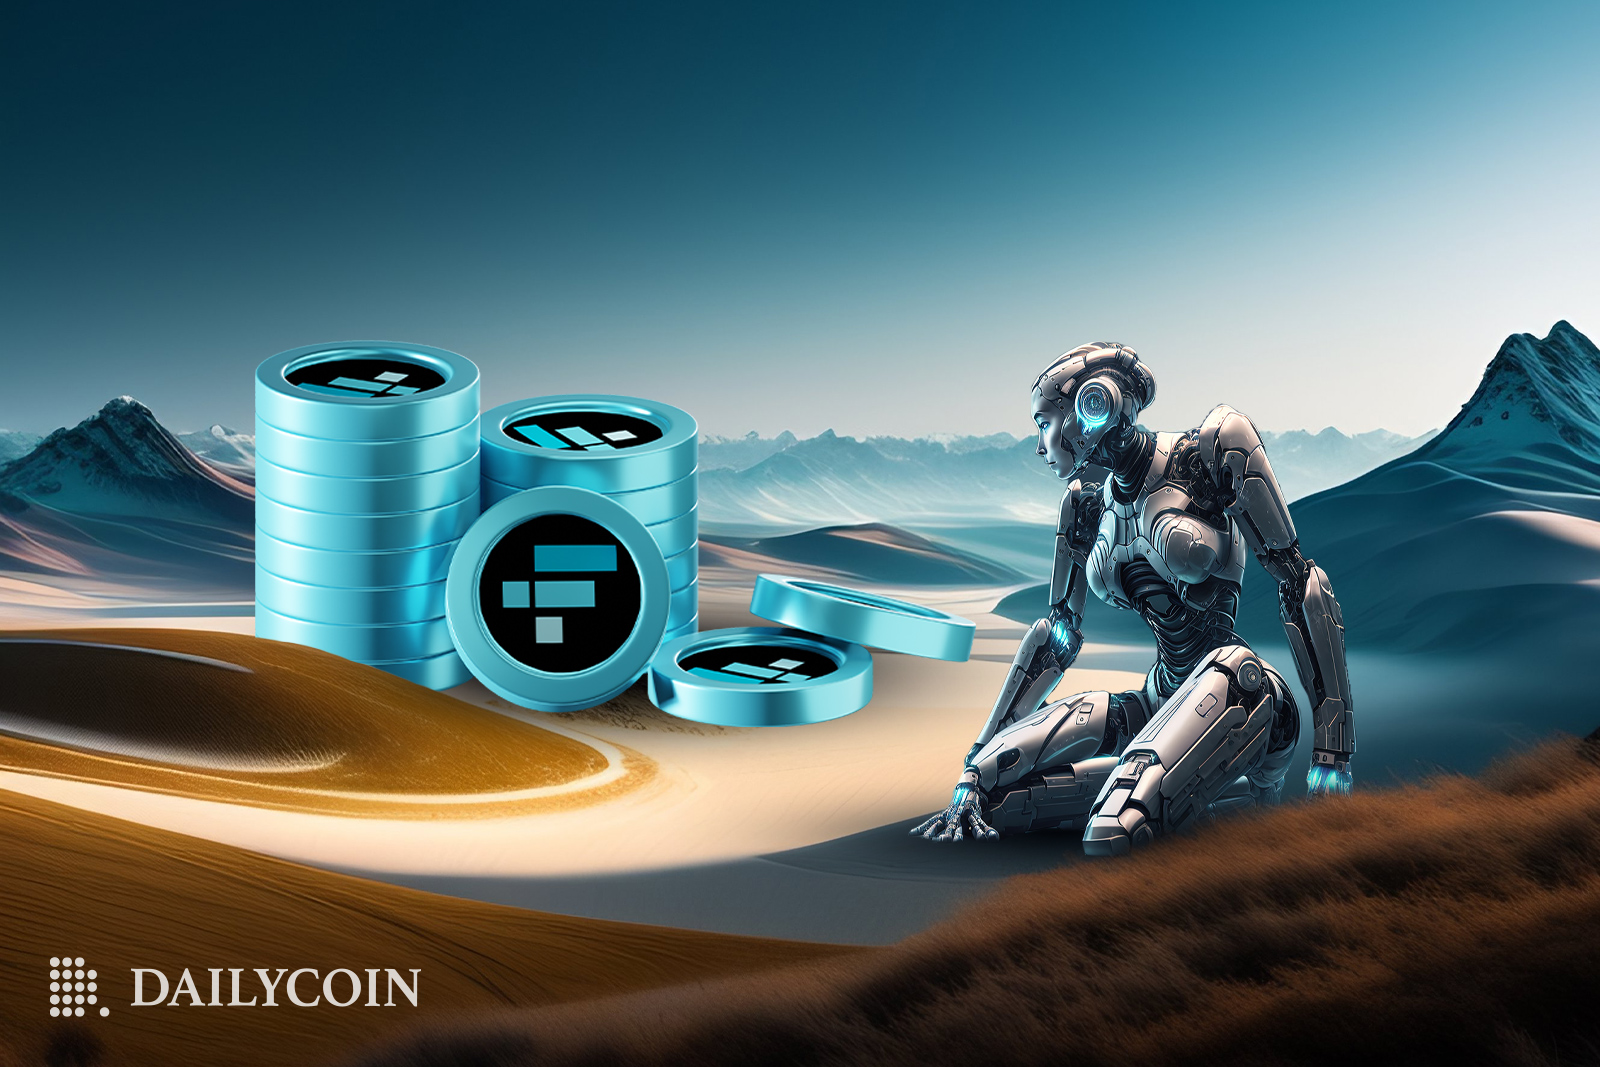 A silver robot sitting down in a snow covered desert near neatly stacked FTT tokens.